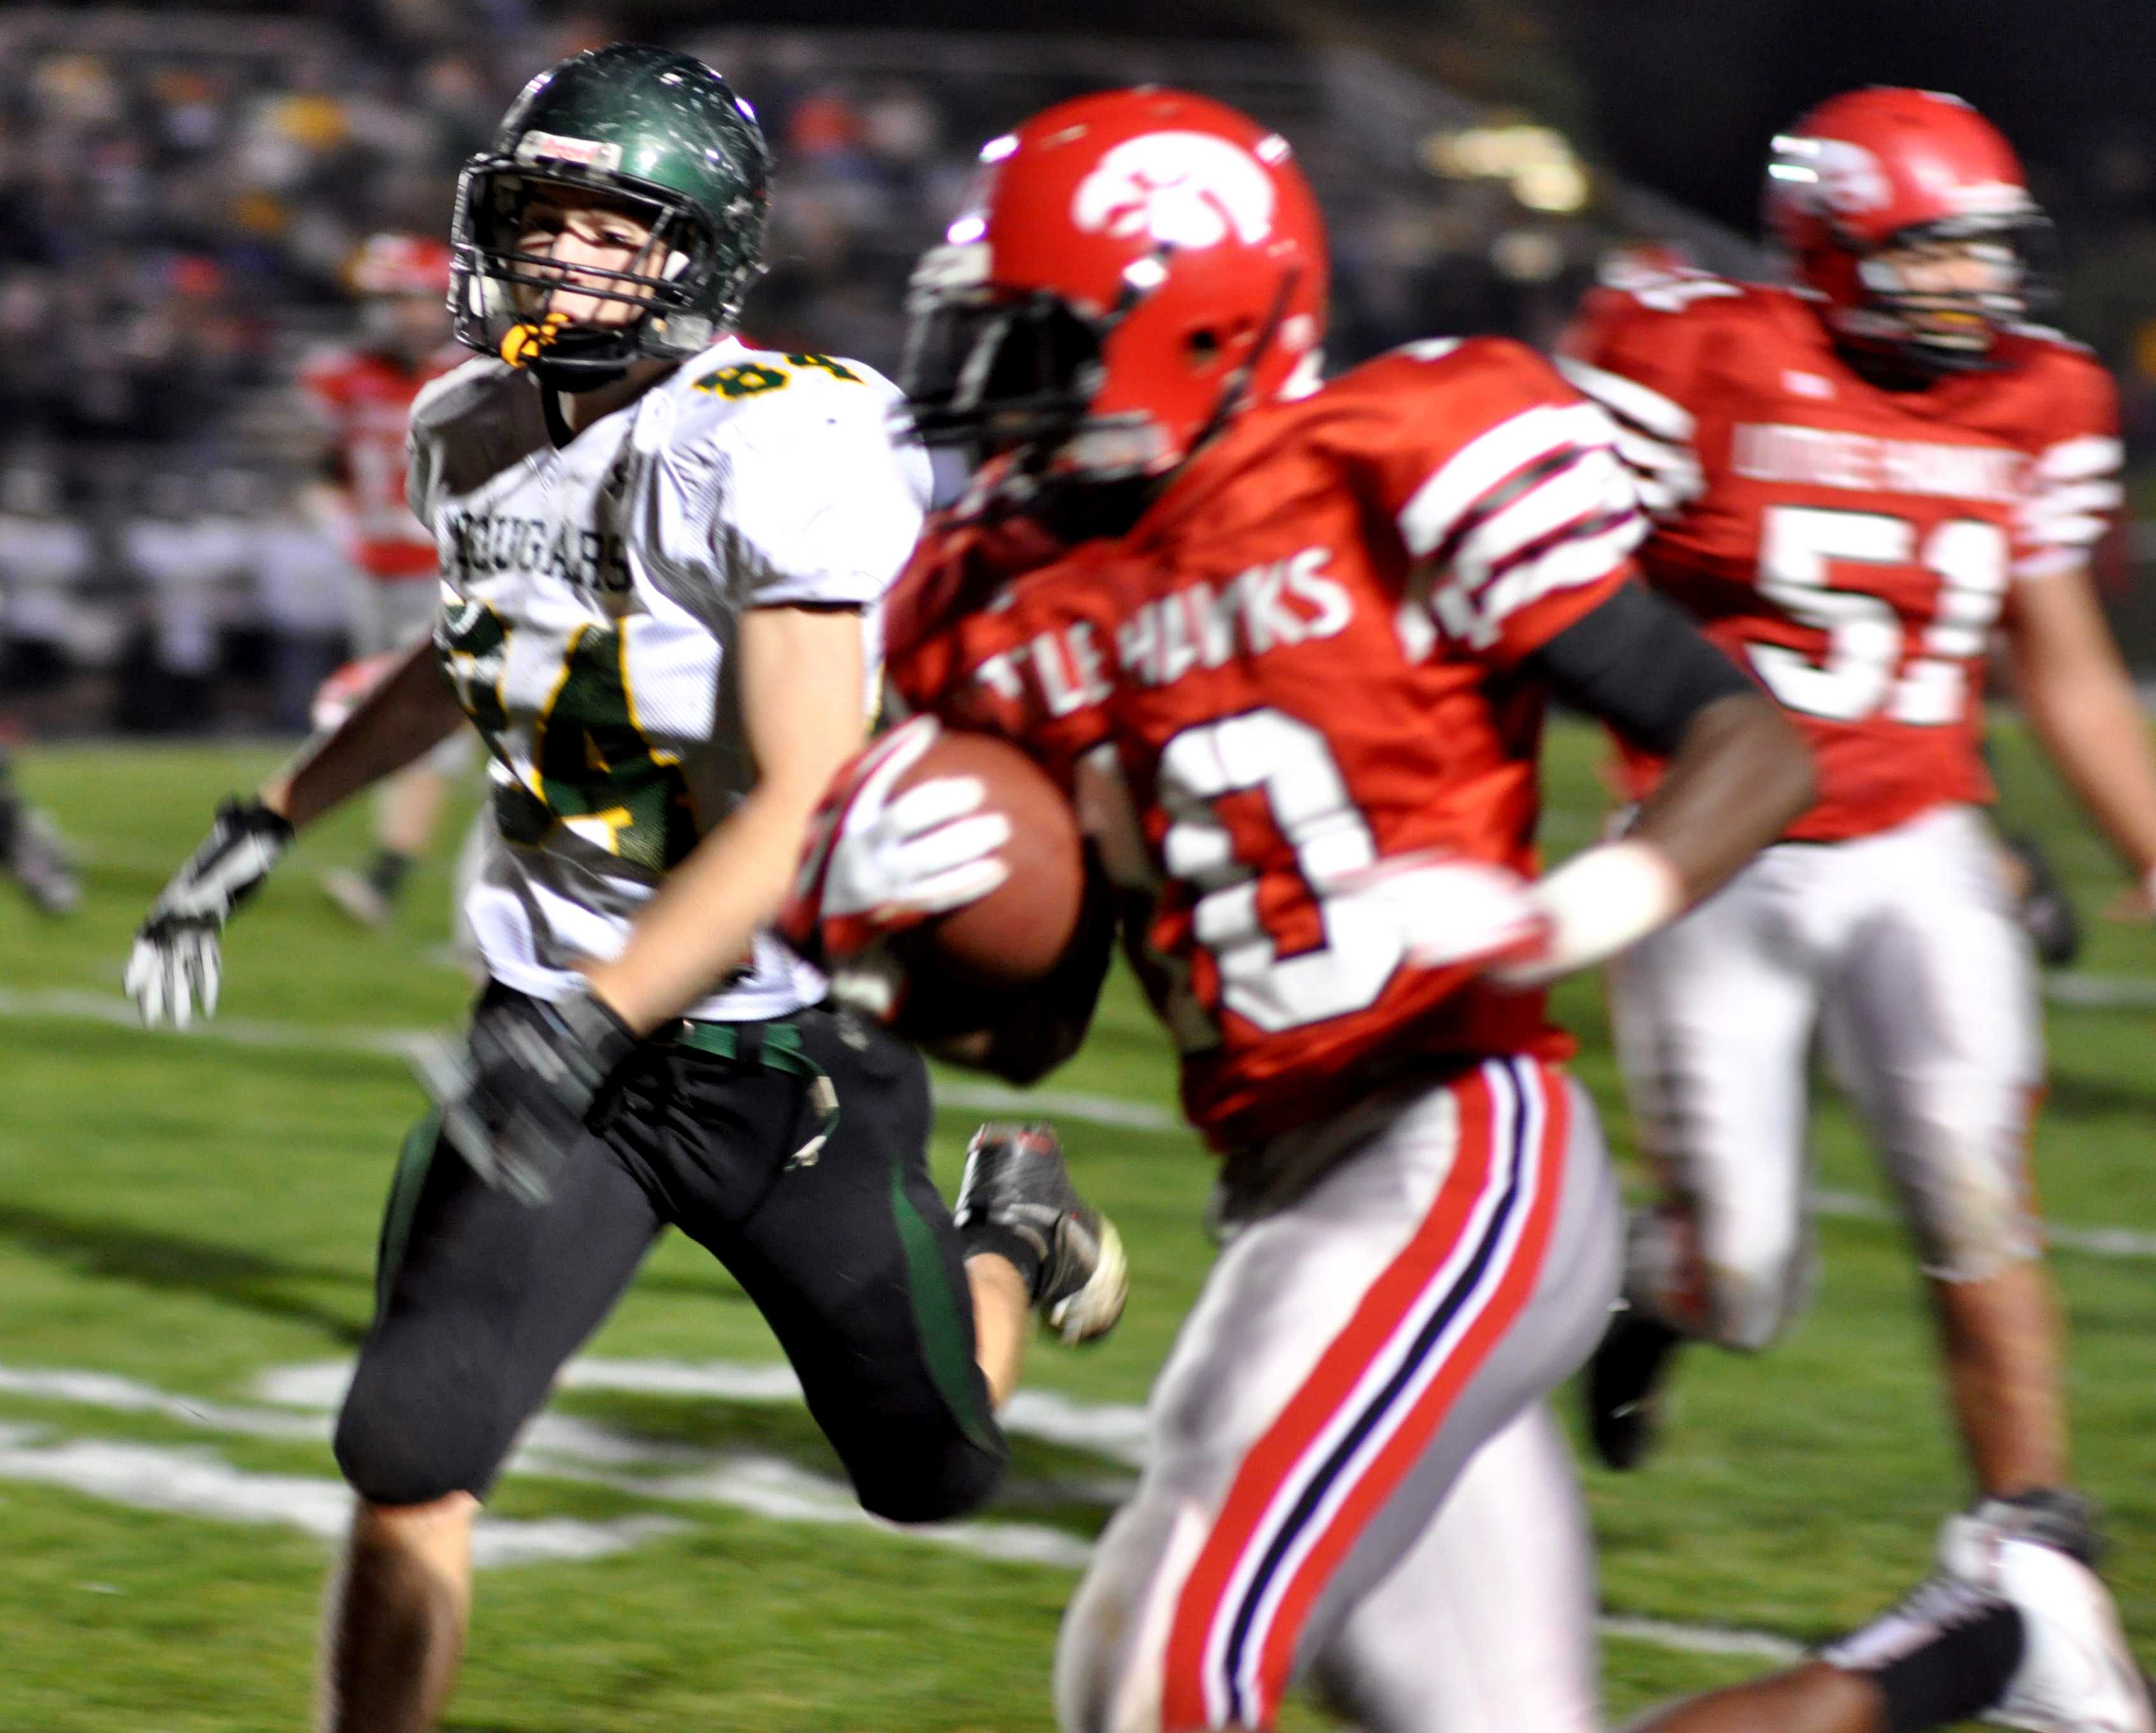 Number 84, Tommy Kaiser, jr., goes after the ball.